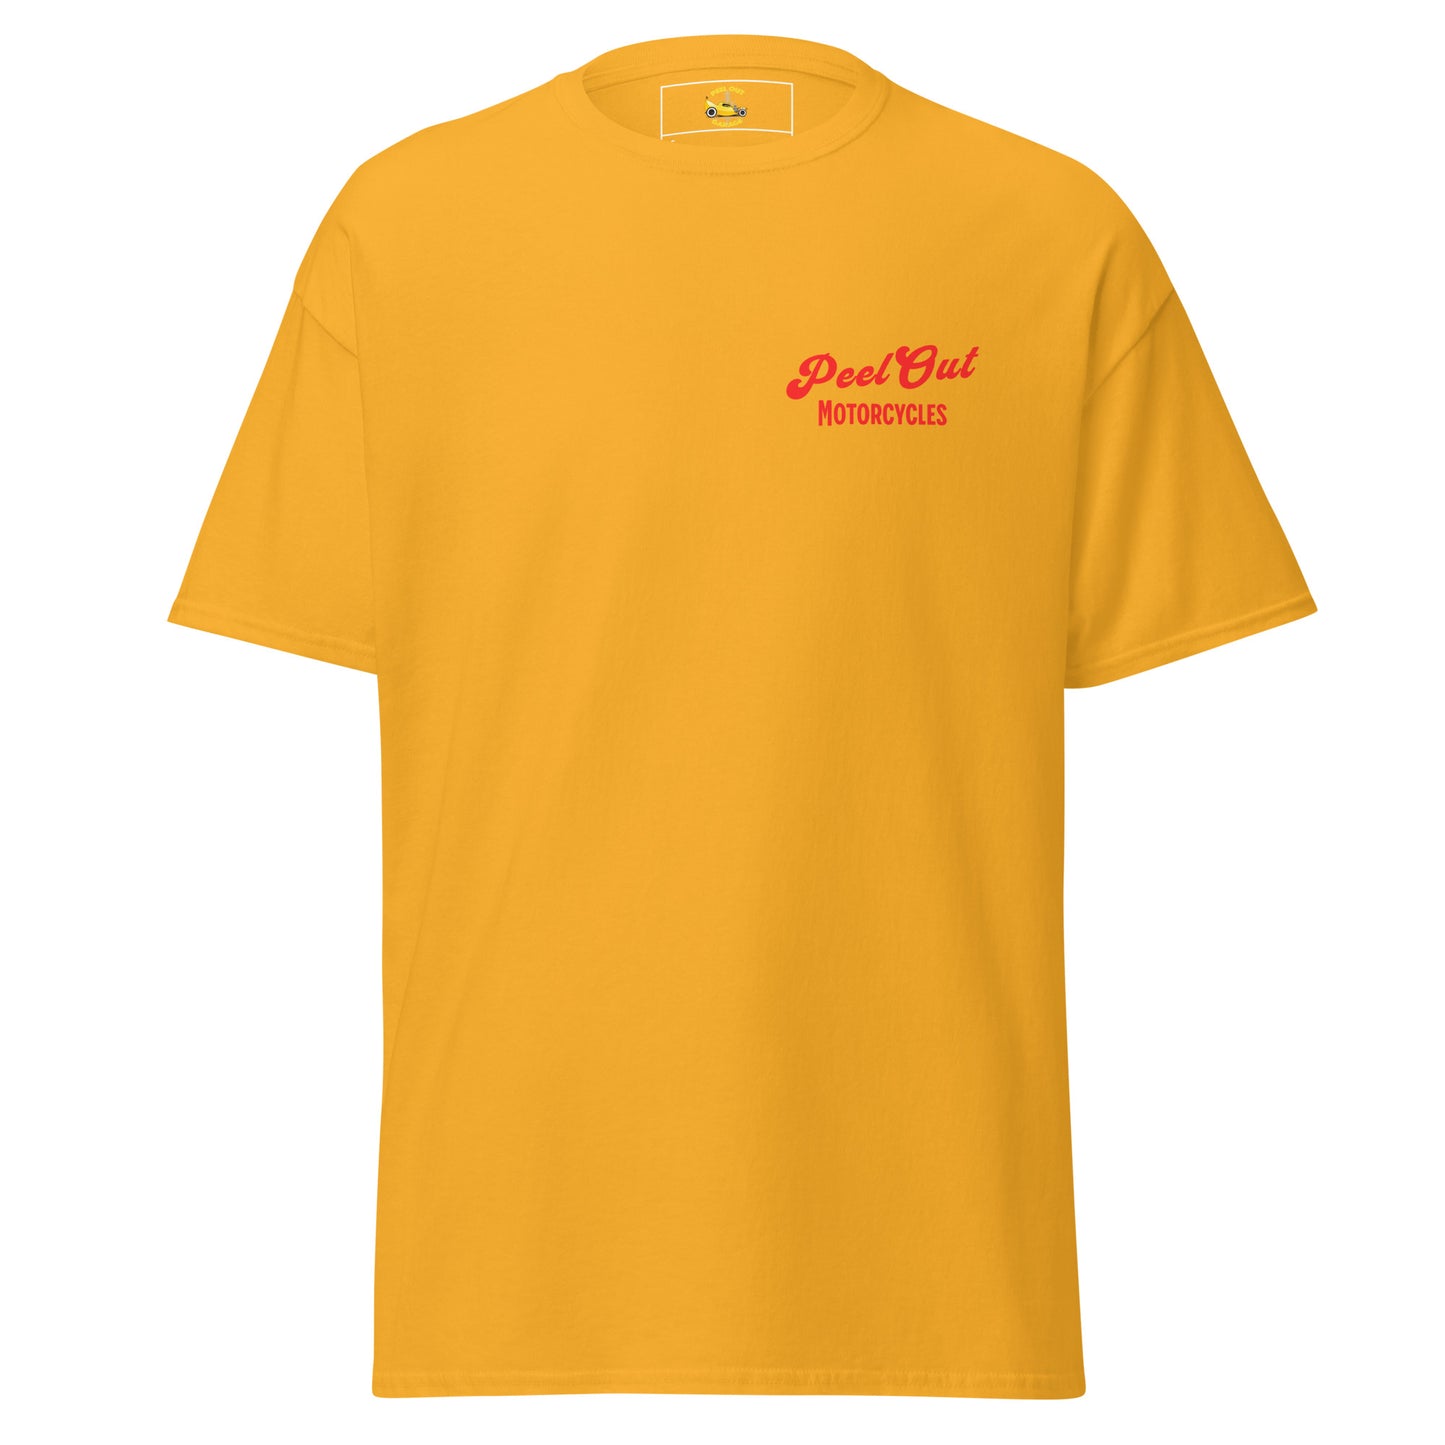 Peel Out Motorcycles Tee - Yellow